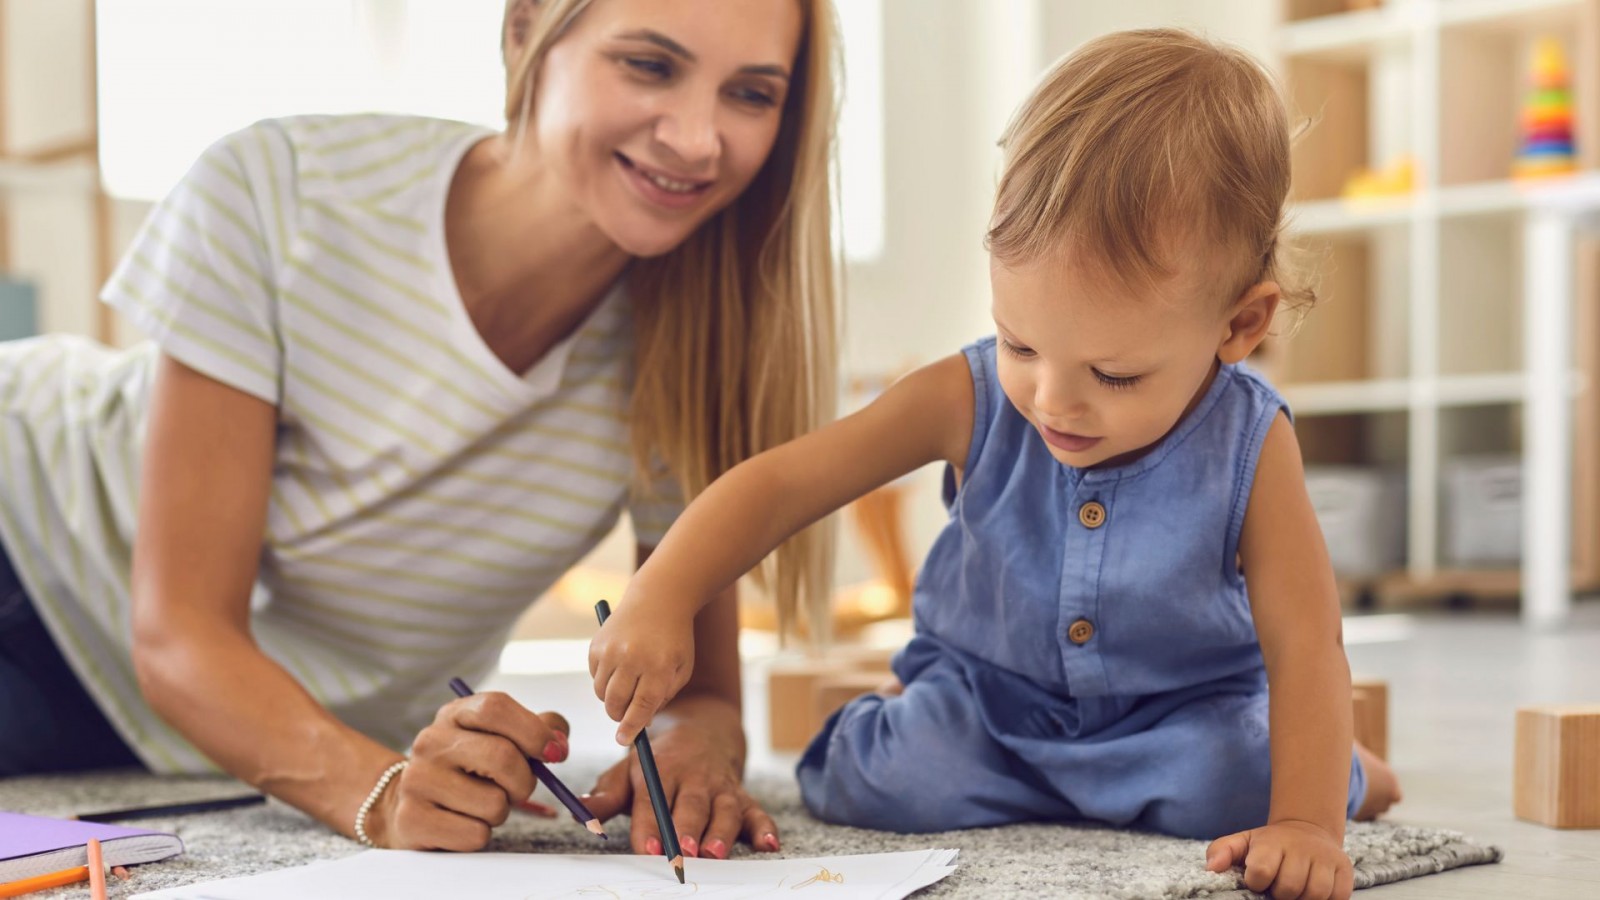 Image of woman drawing with a child